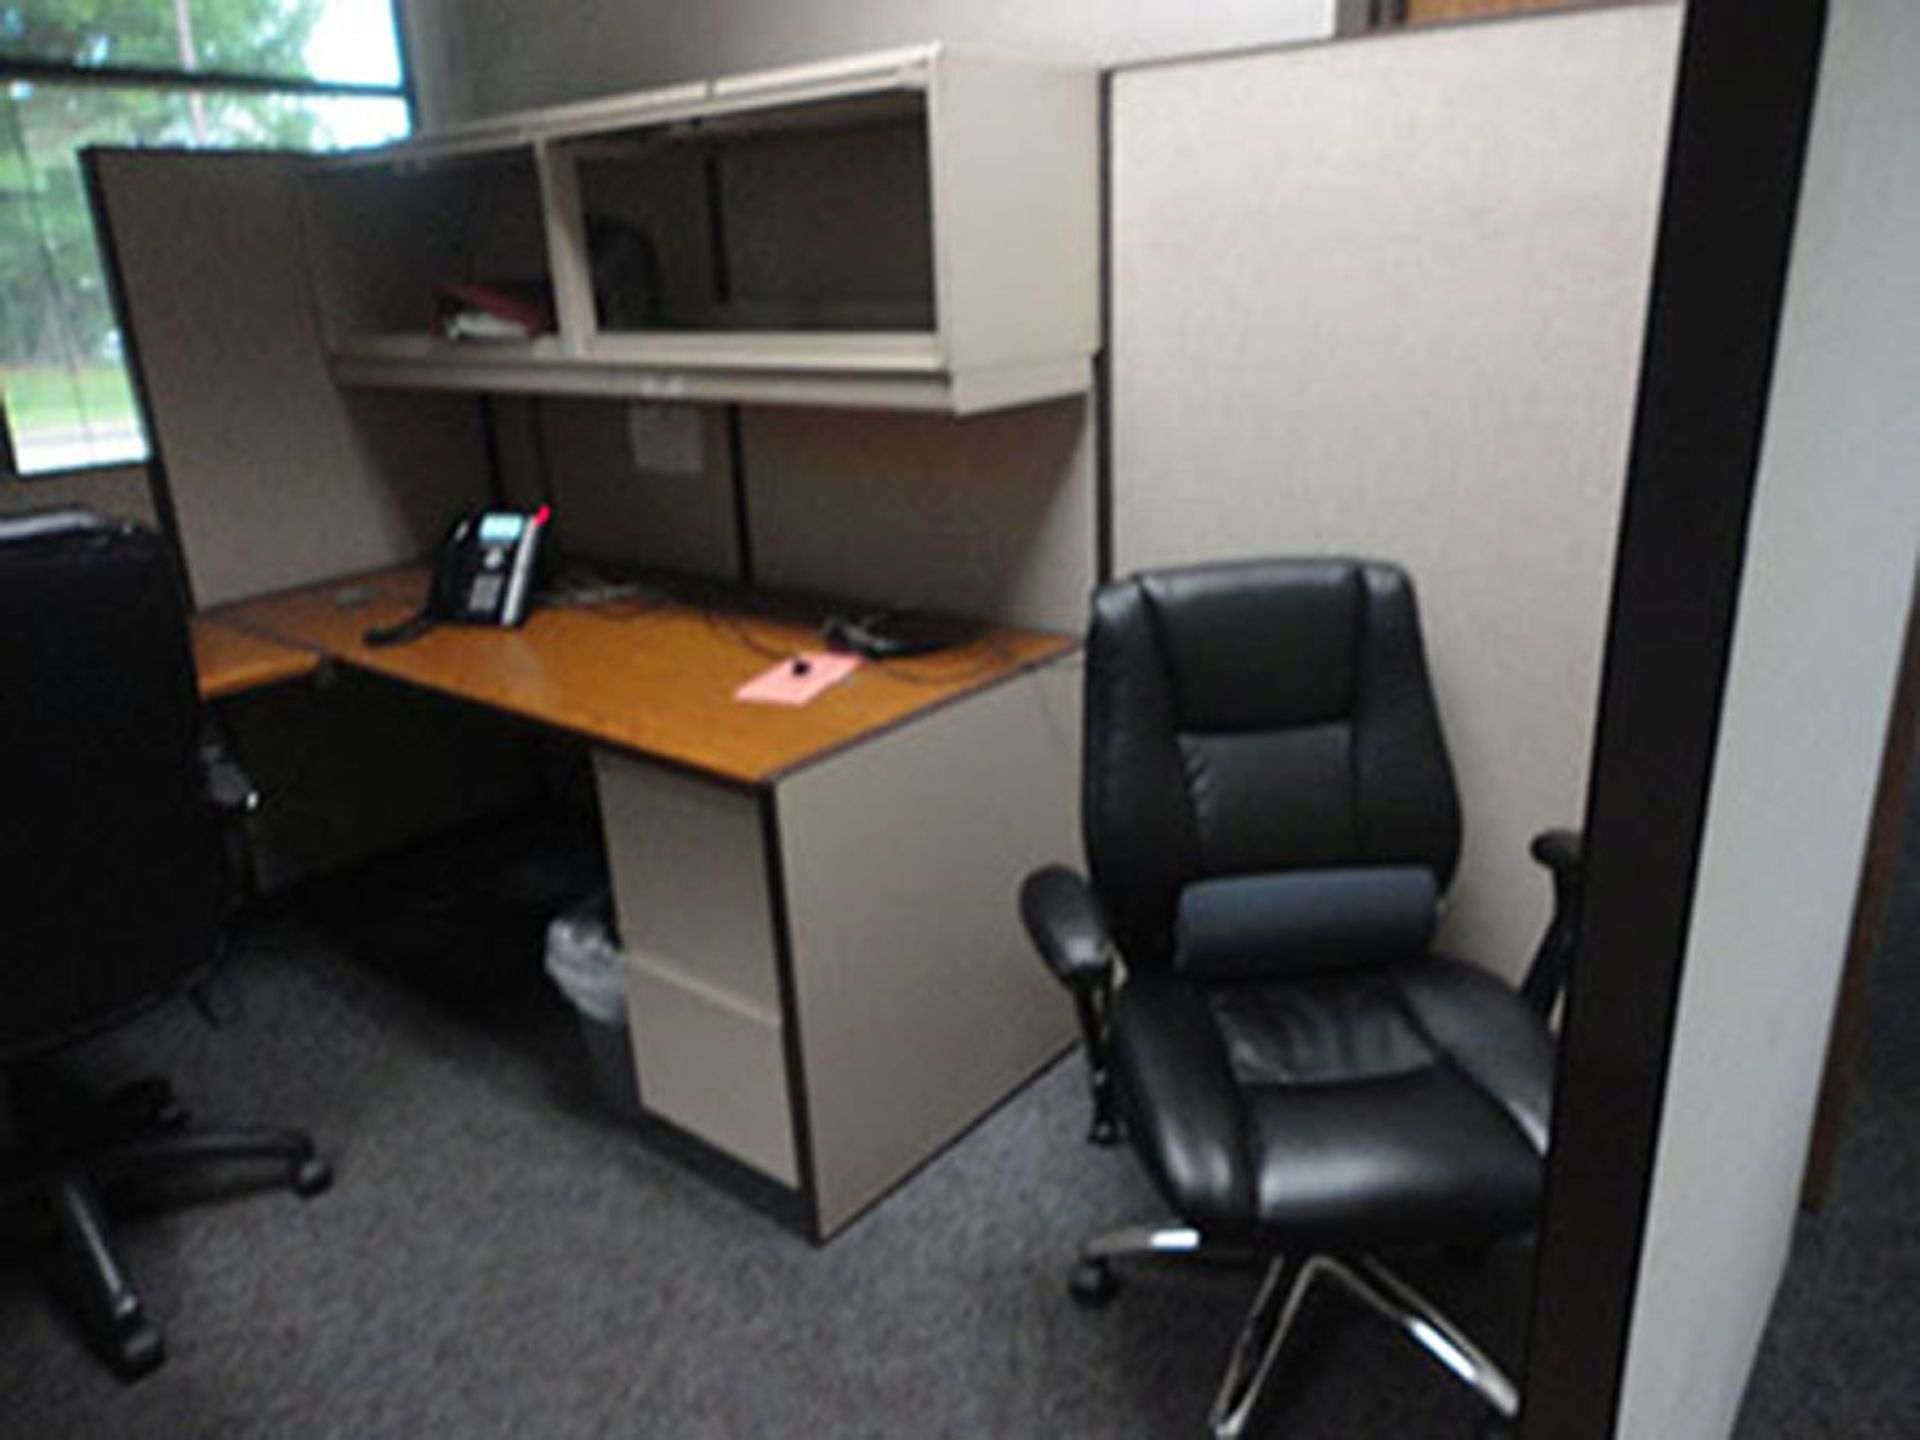 MODULAR OFFICE SYSTEM - Image 7 of 7